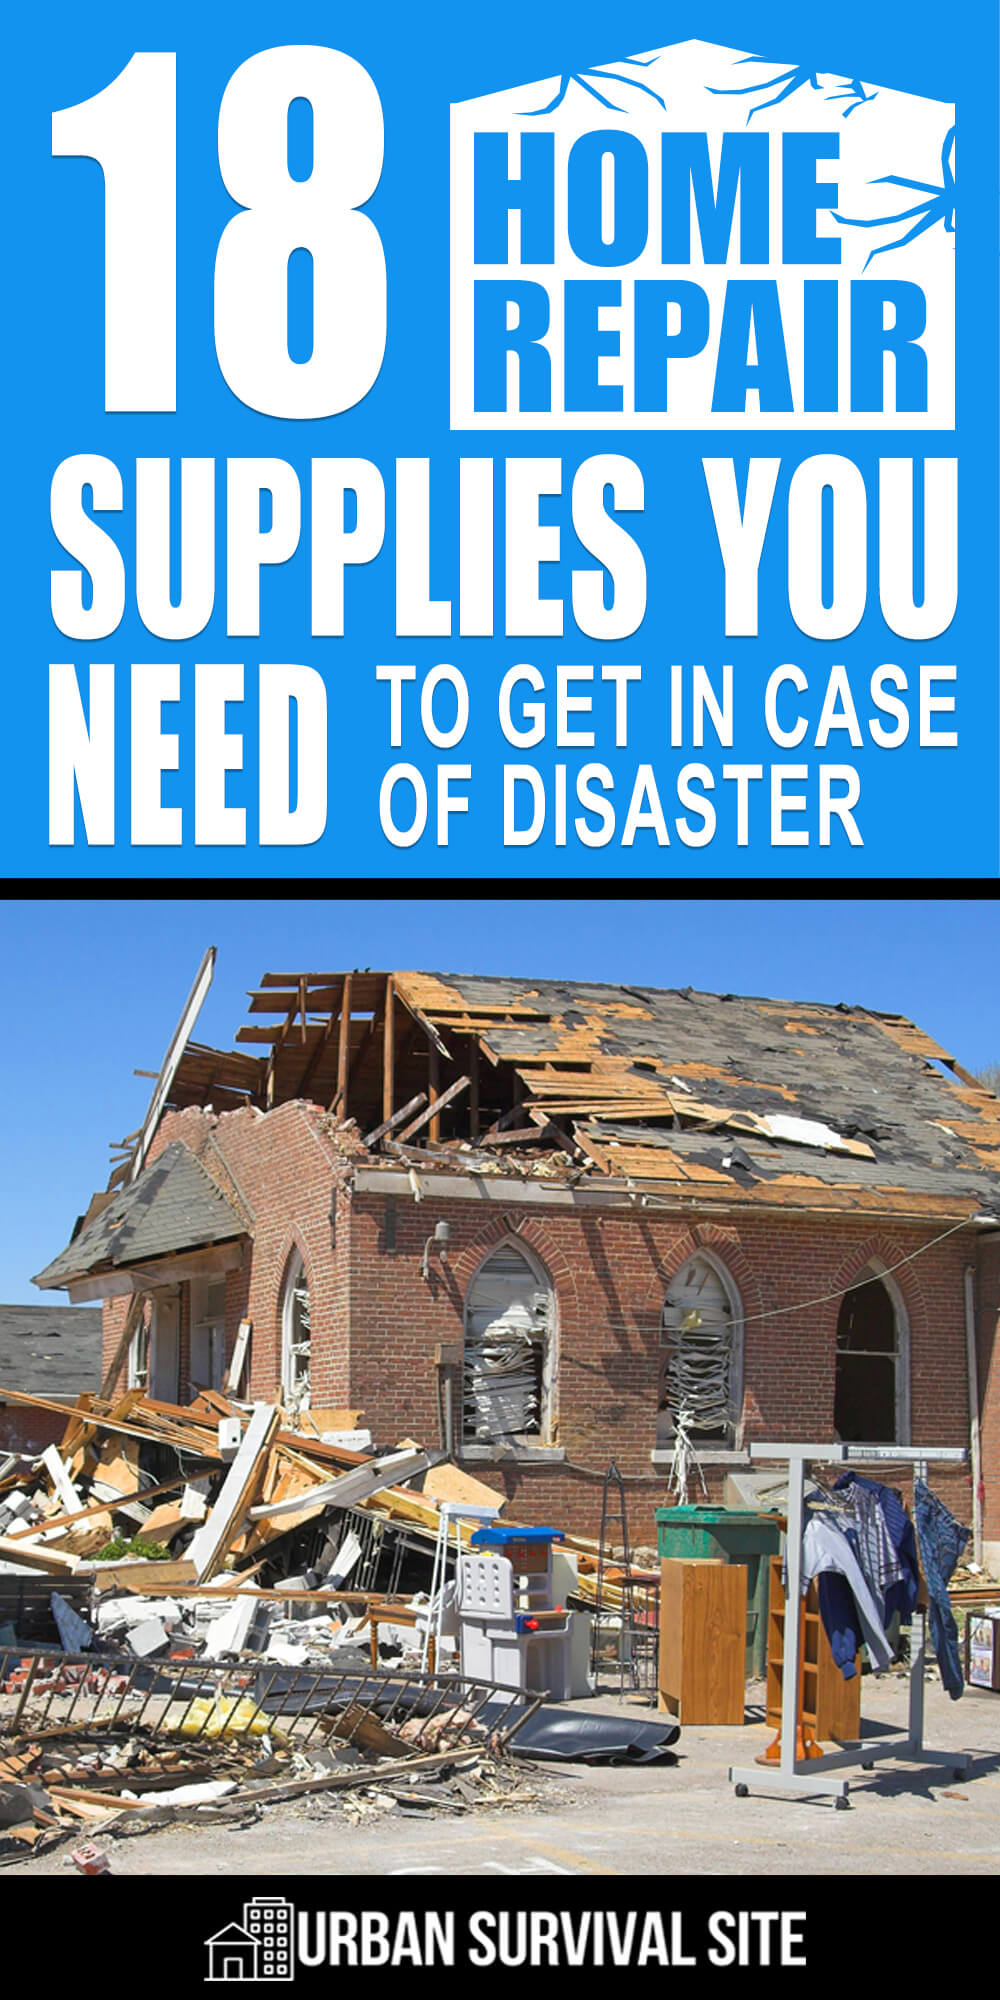 18 Home Repair Supplies You Need to Get in Case of Disaster